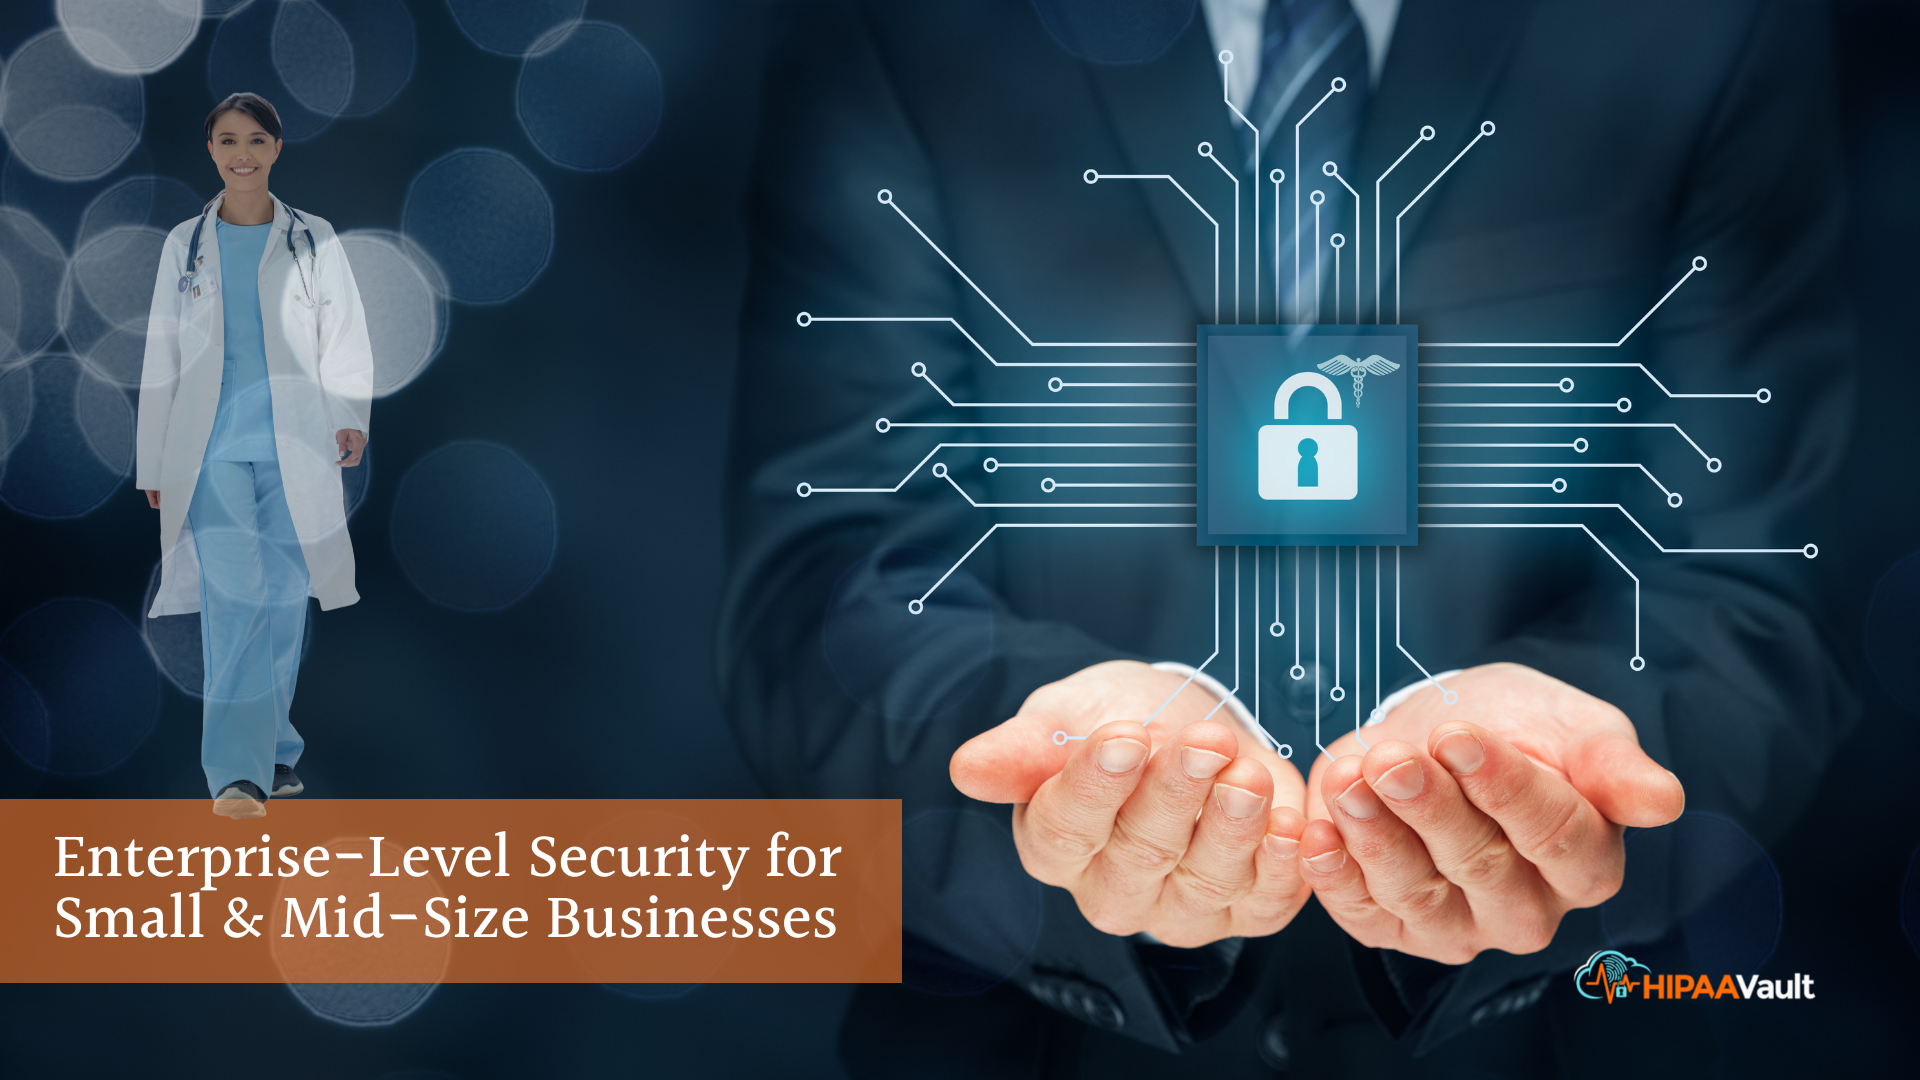 Enterprise-Level Security for Small to Mid-Sized Businesses